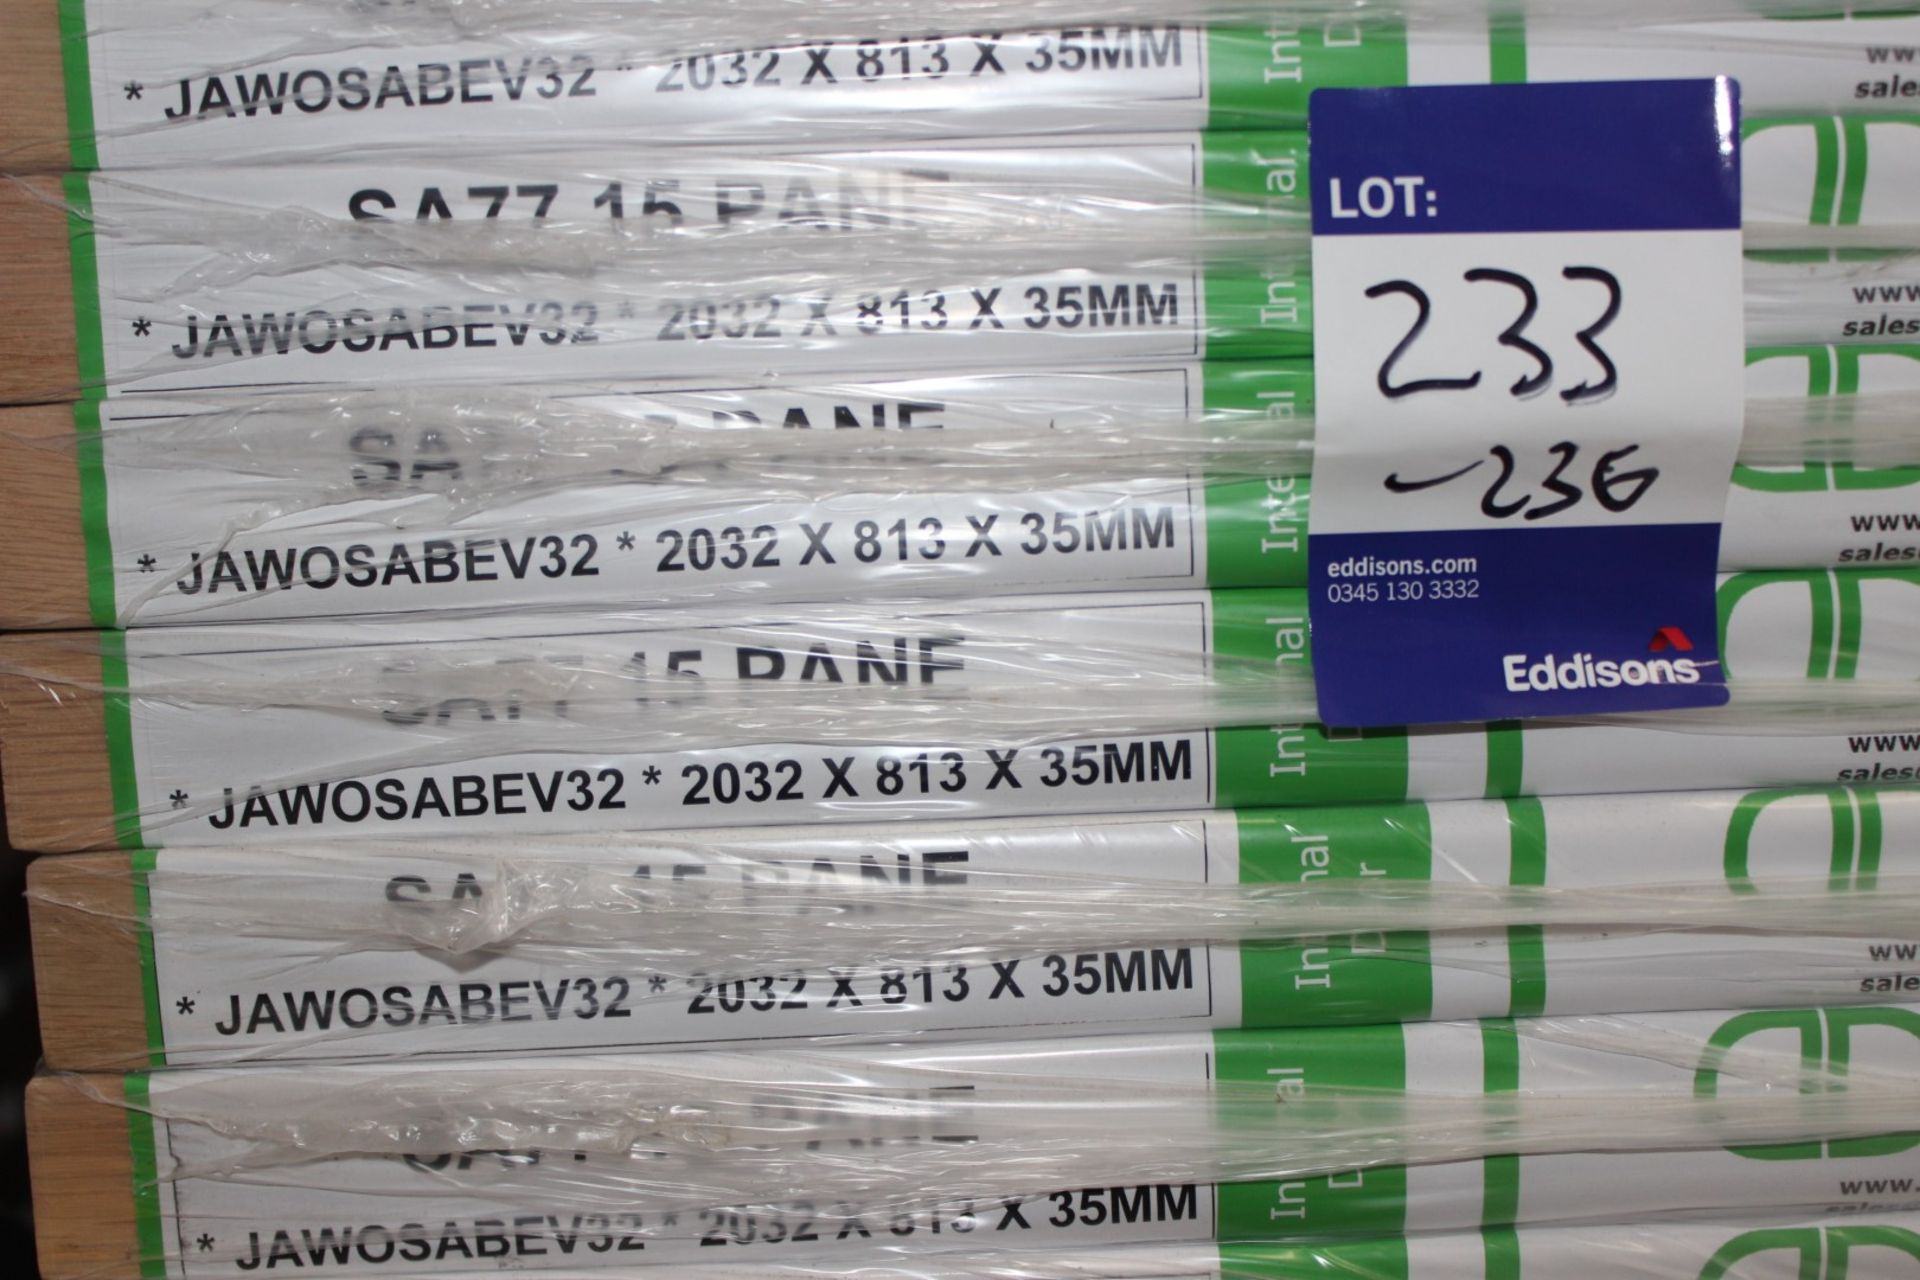 5 x SA77 15 Pane Internal, JAWOSABEB32, 2032mm x 813mm x 35mm - Lots to be handed out in order - Image 3 of 3